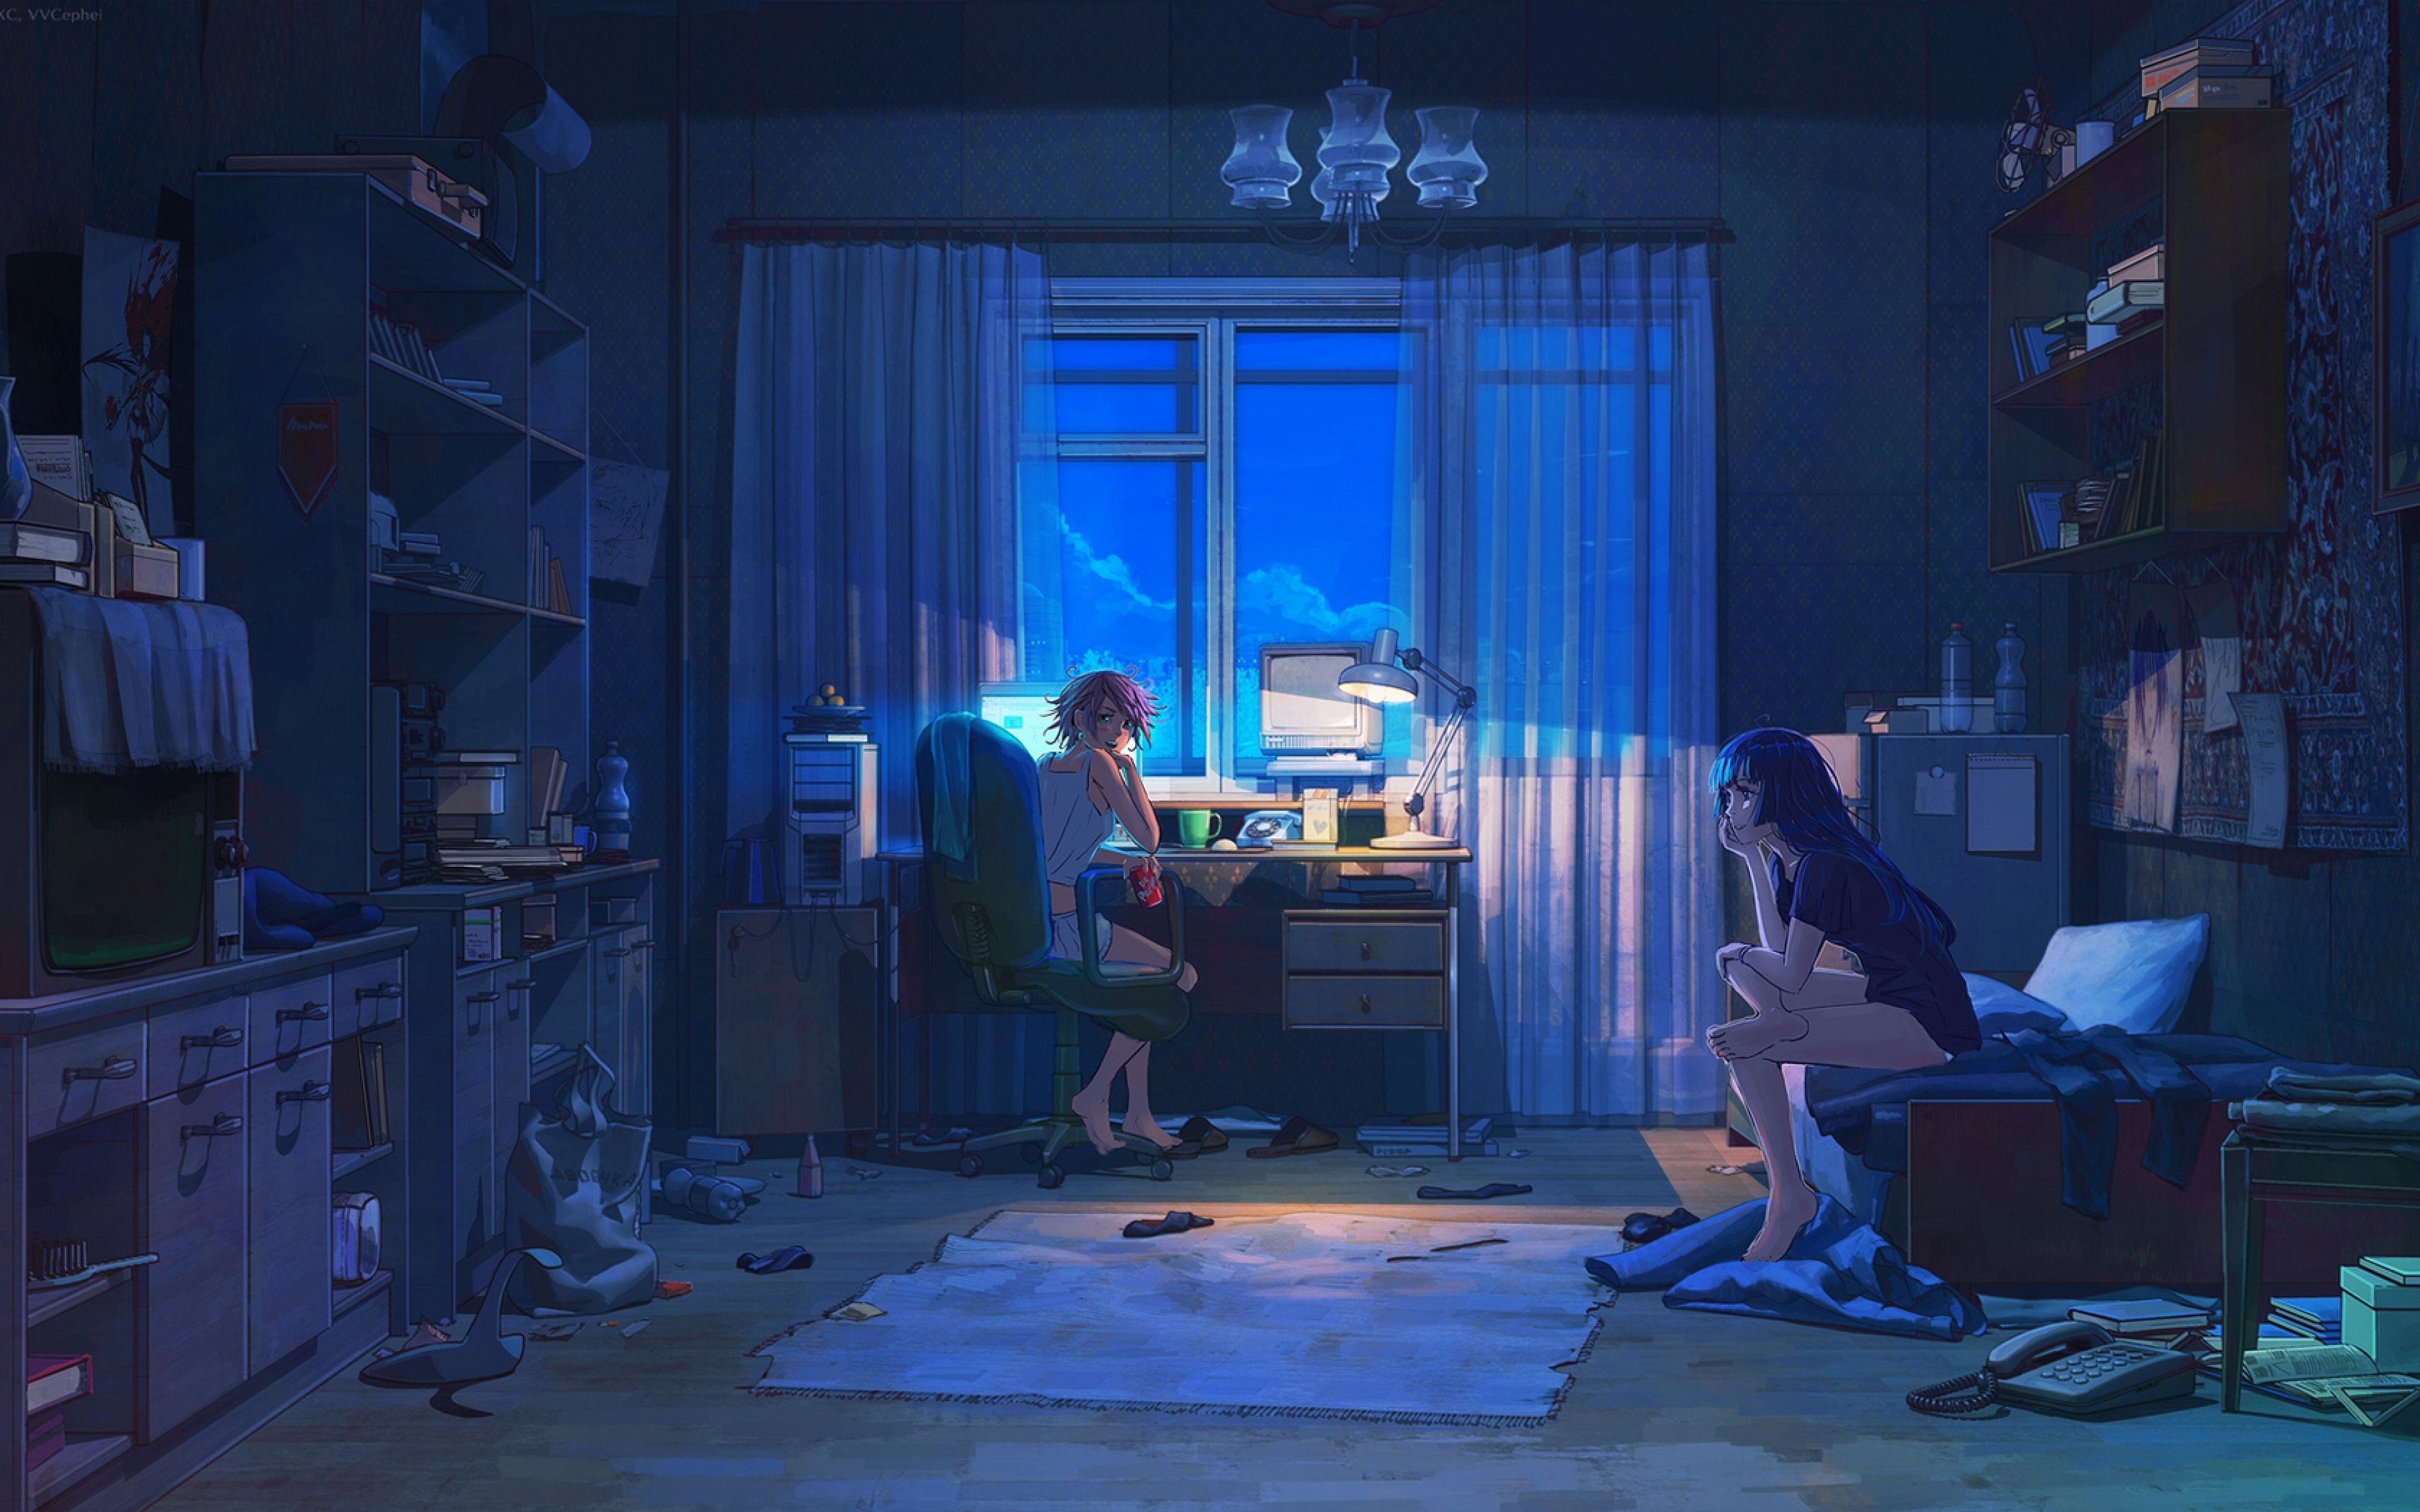 Download Wallpaper 3840x2400 night, room, girls, friends, things, computer, drinks, lamp, shelves, tv. Anime wallpaper 1920x Scenery wallpaper, Anime scenery